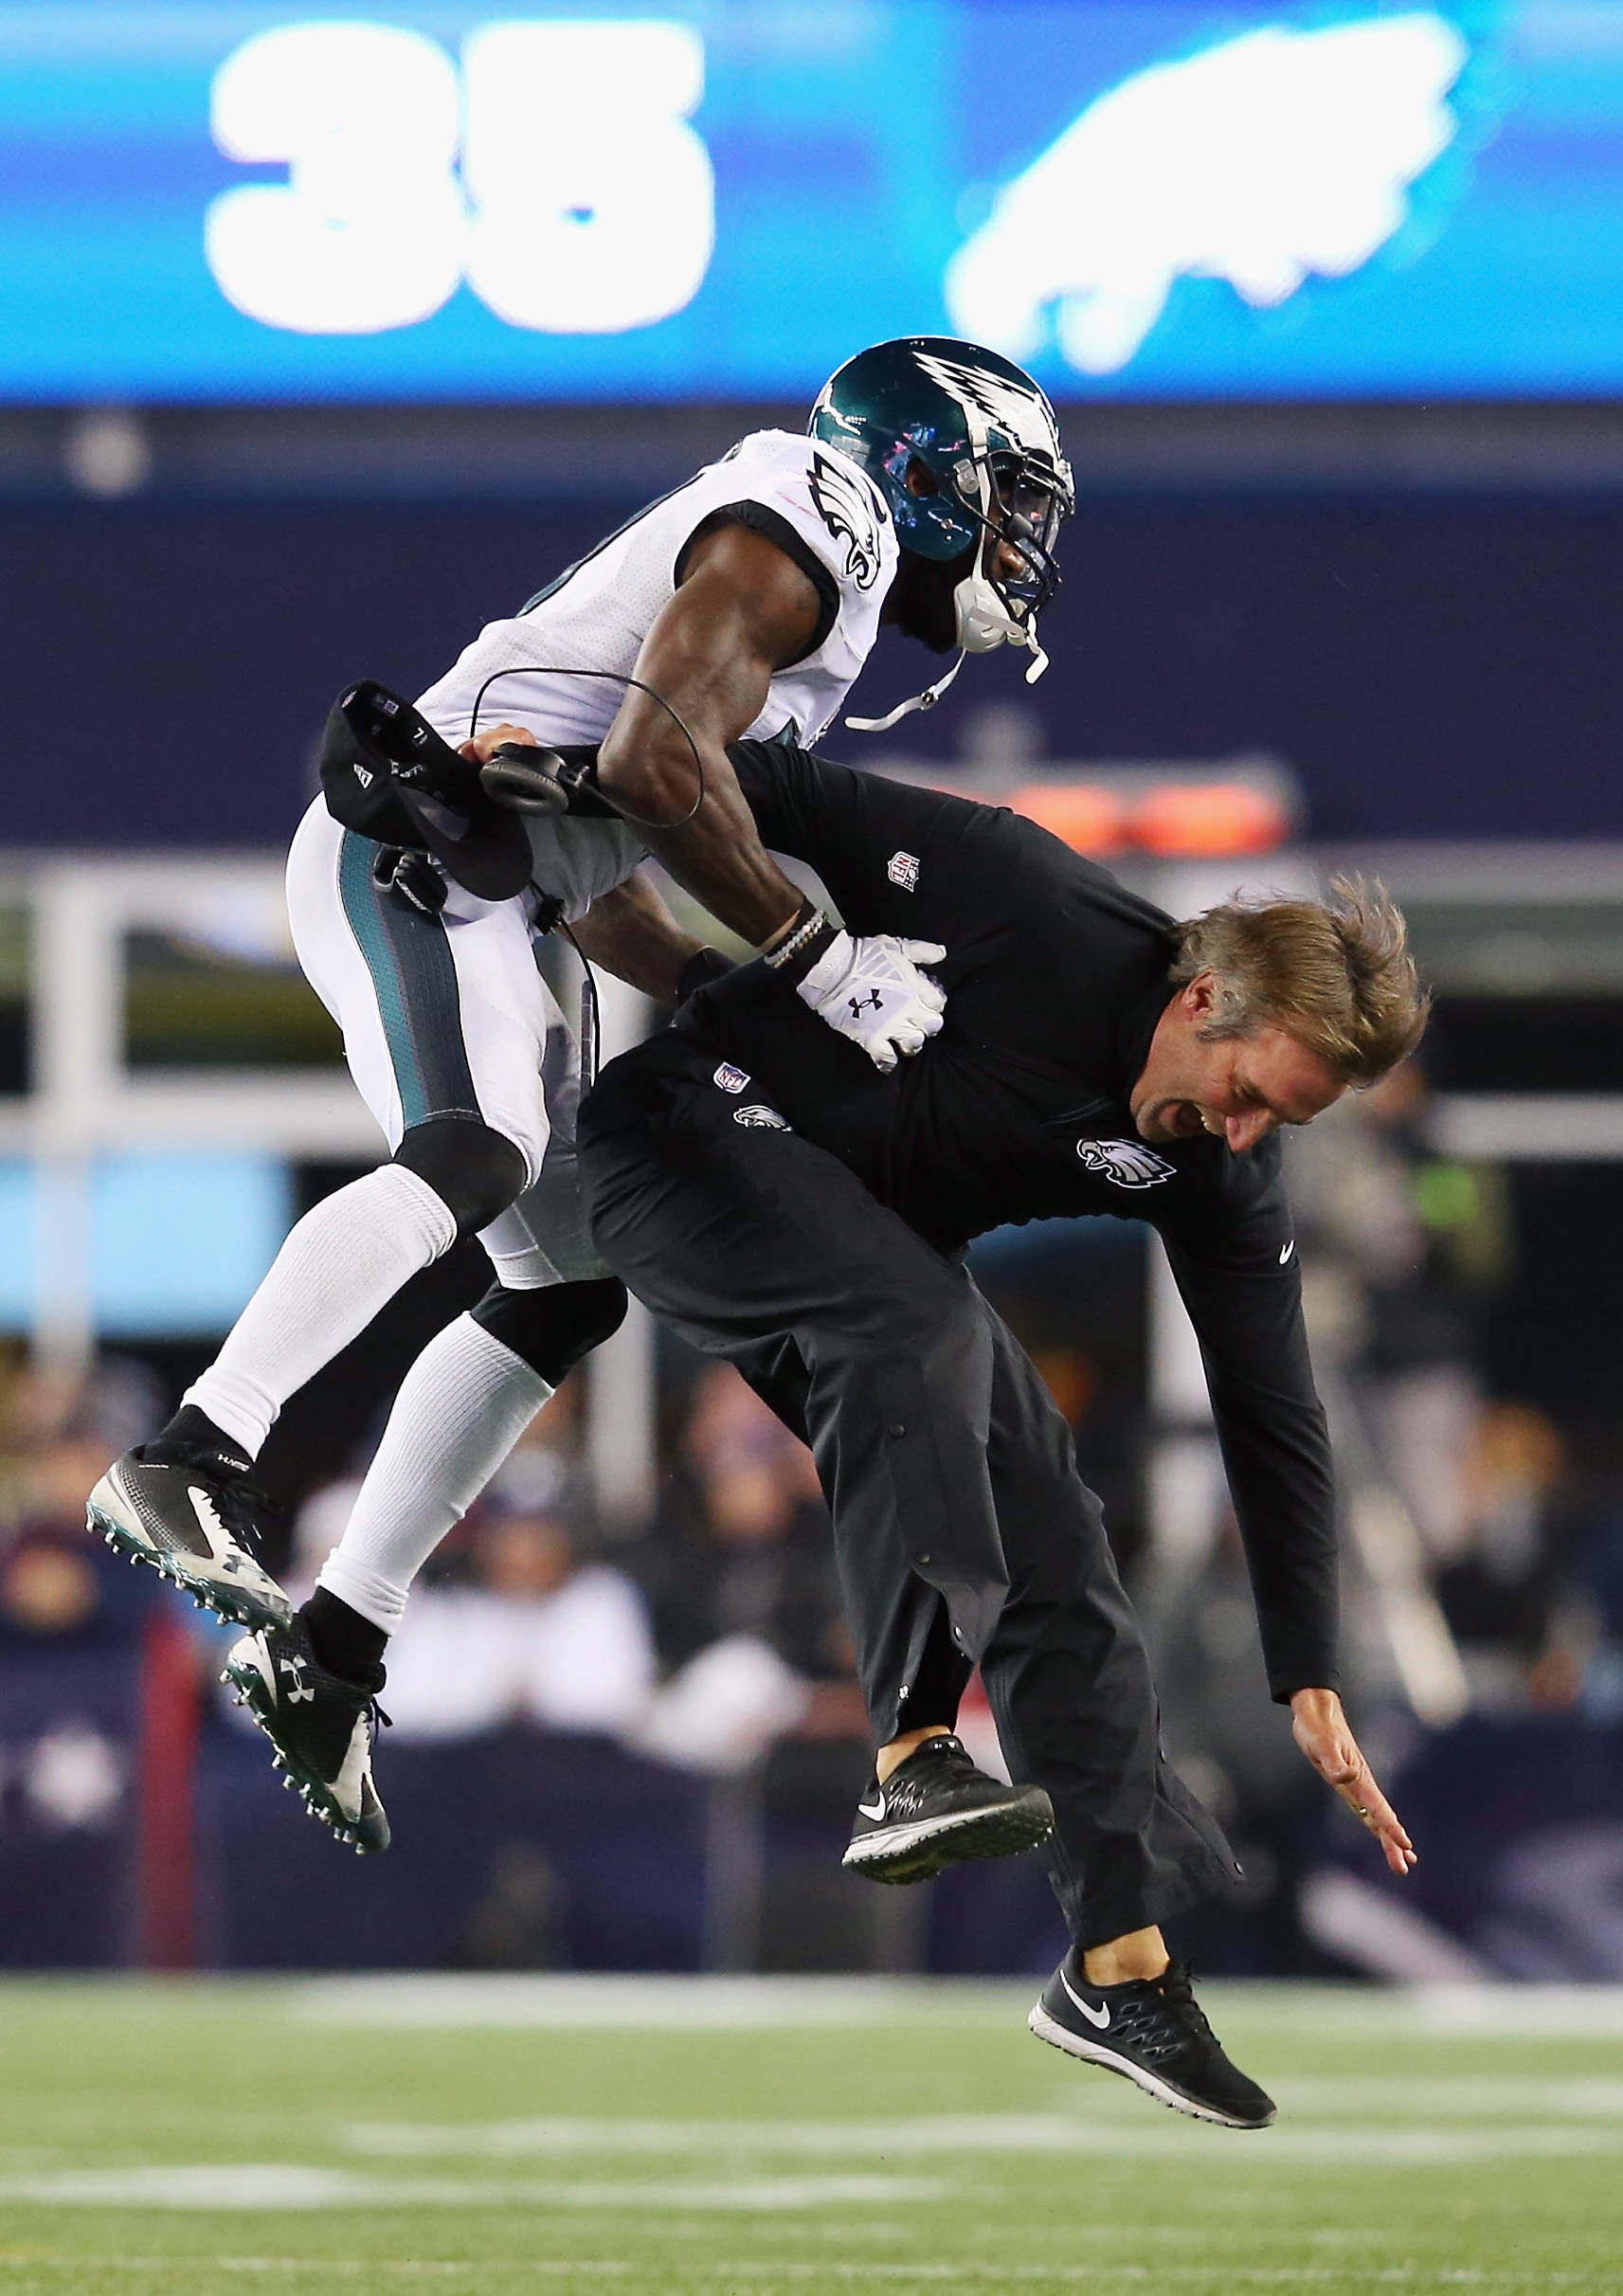 Malcolm Jenkins celebrates with defensive backs coach Cory Undlin. (Photo by Jim Rogash/Getty Images)